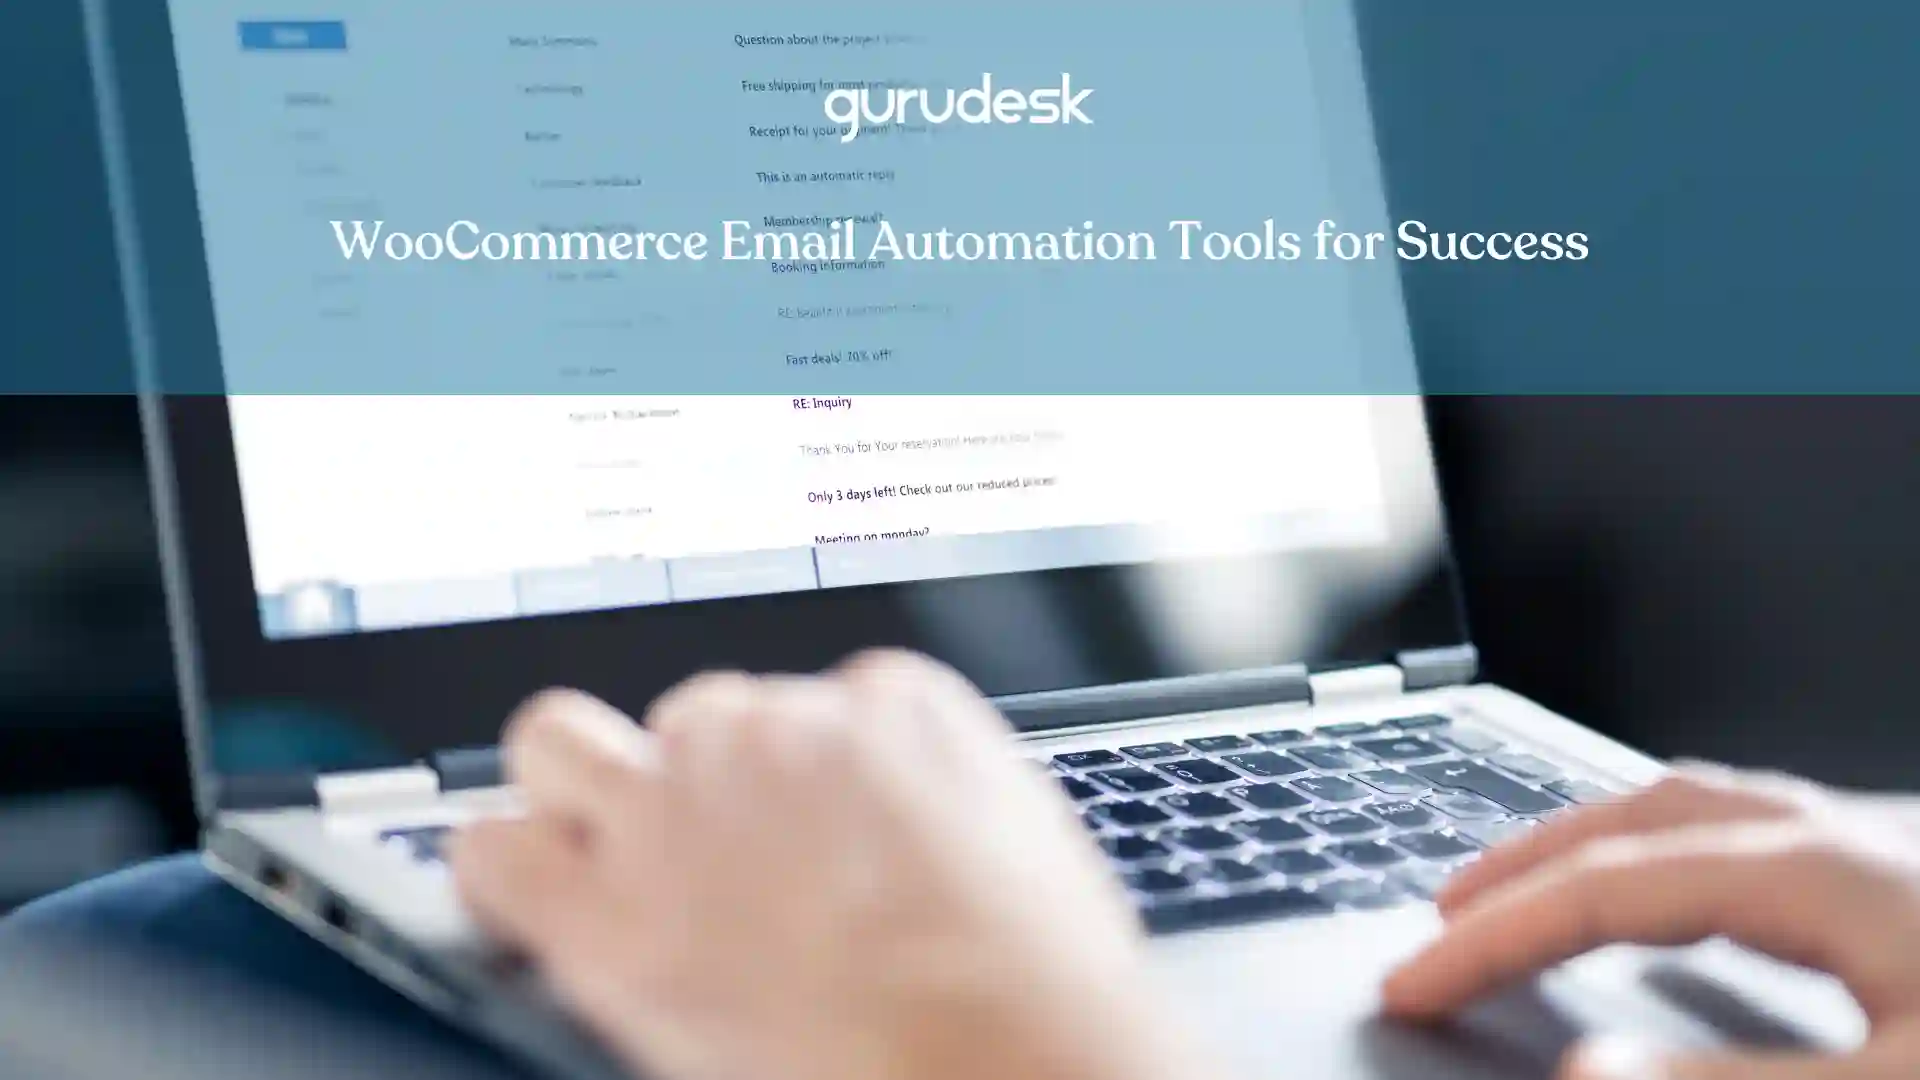 WooCommerce Email Automation Tools for Success